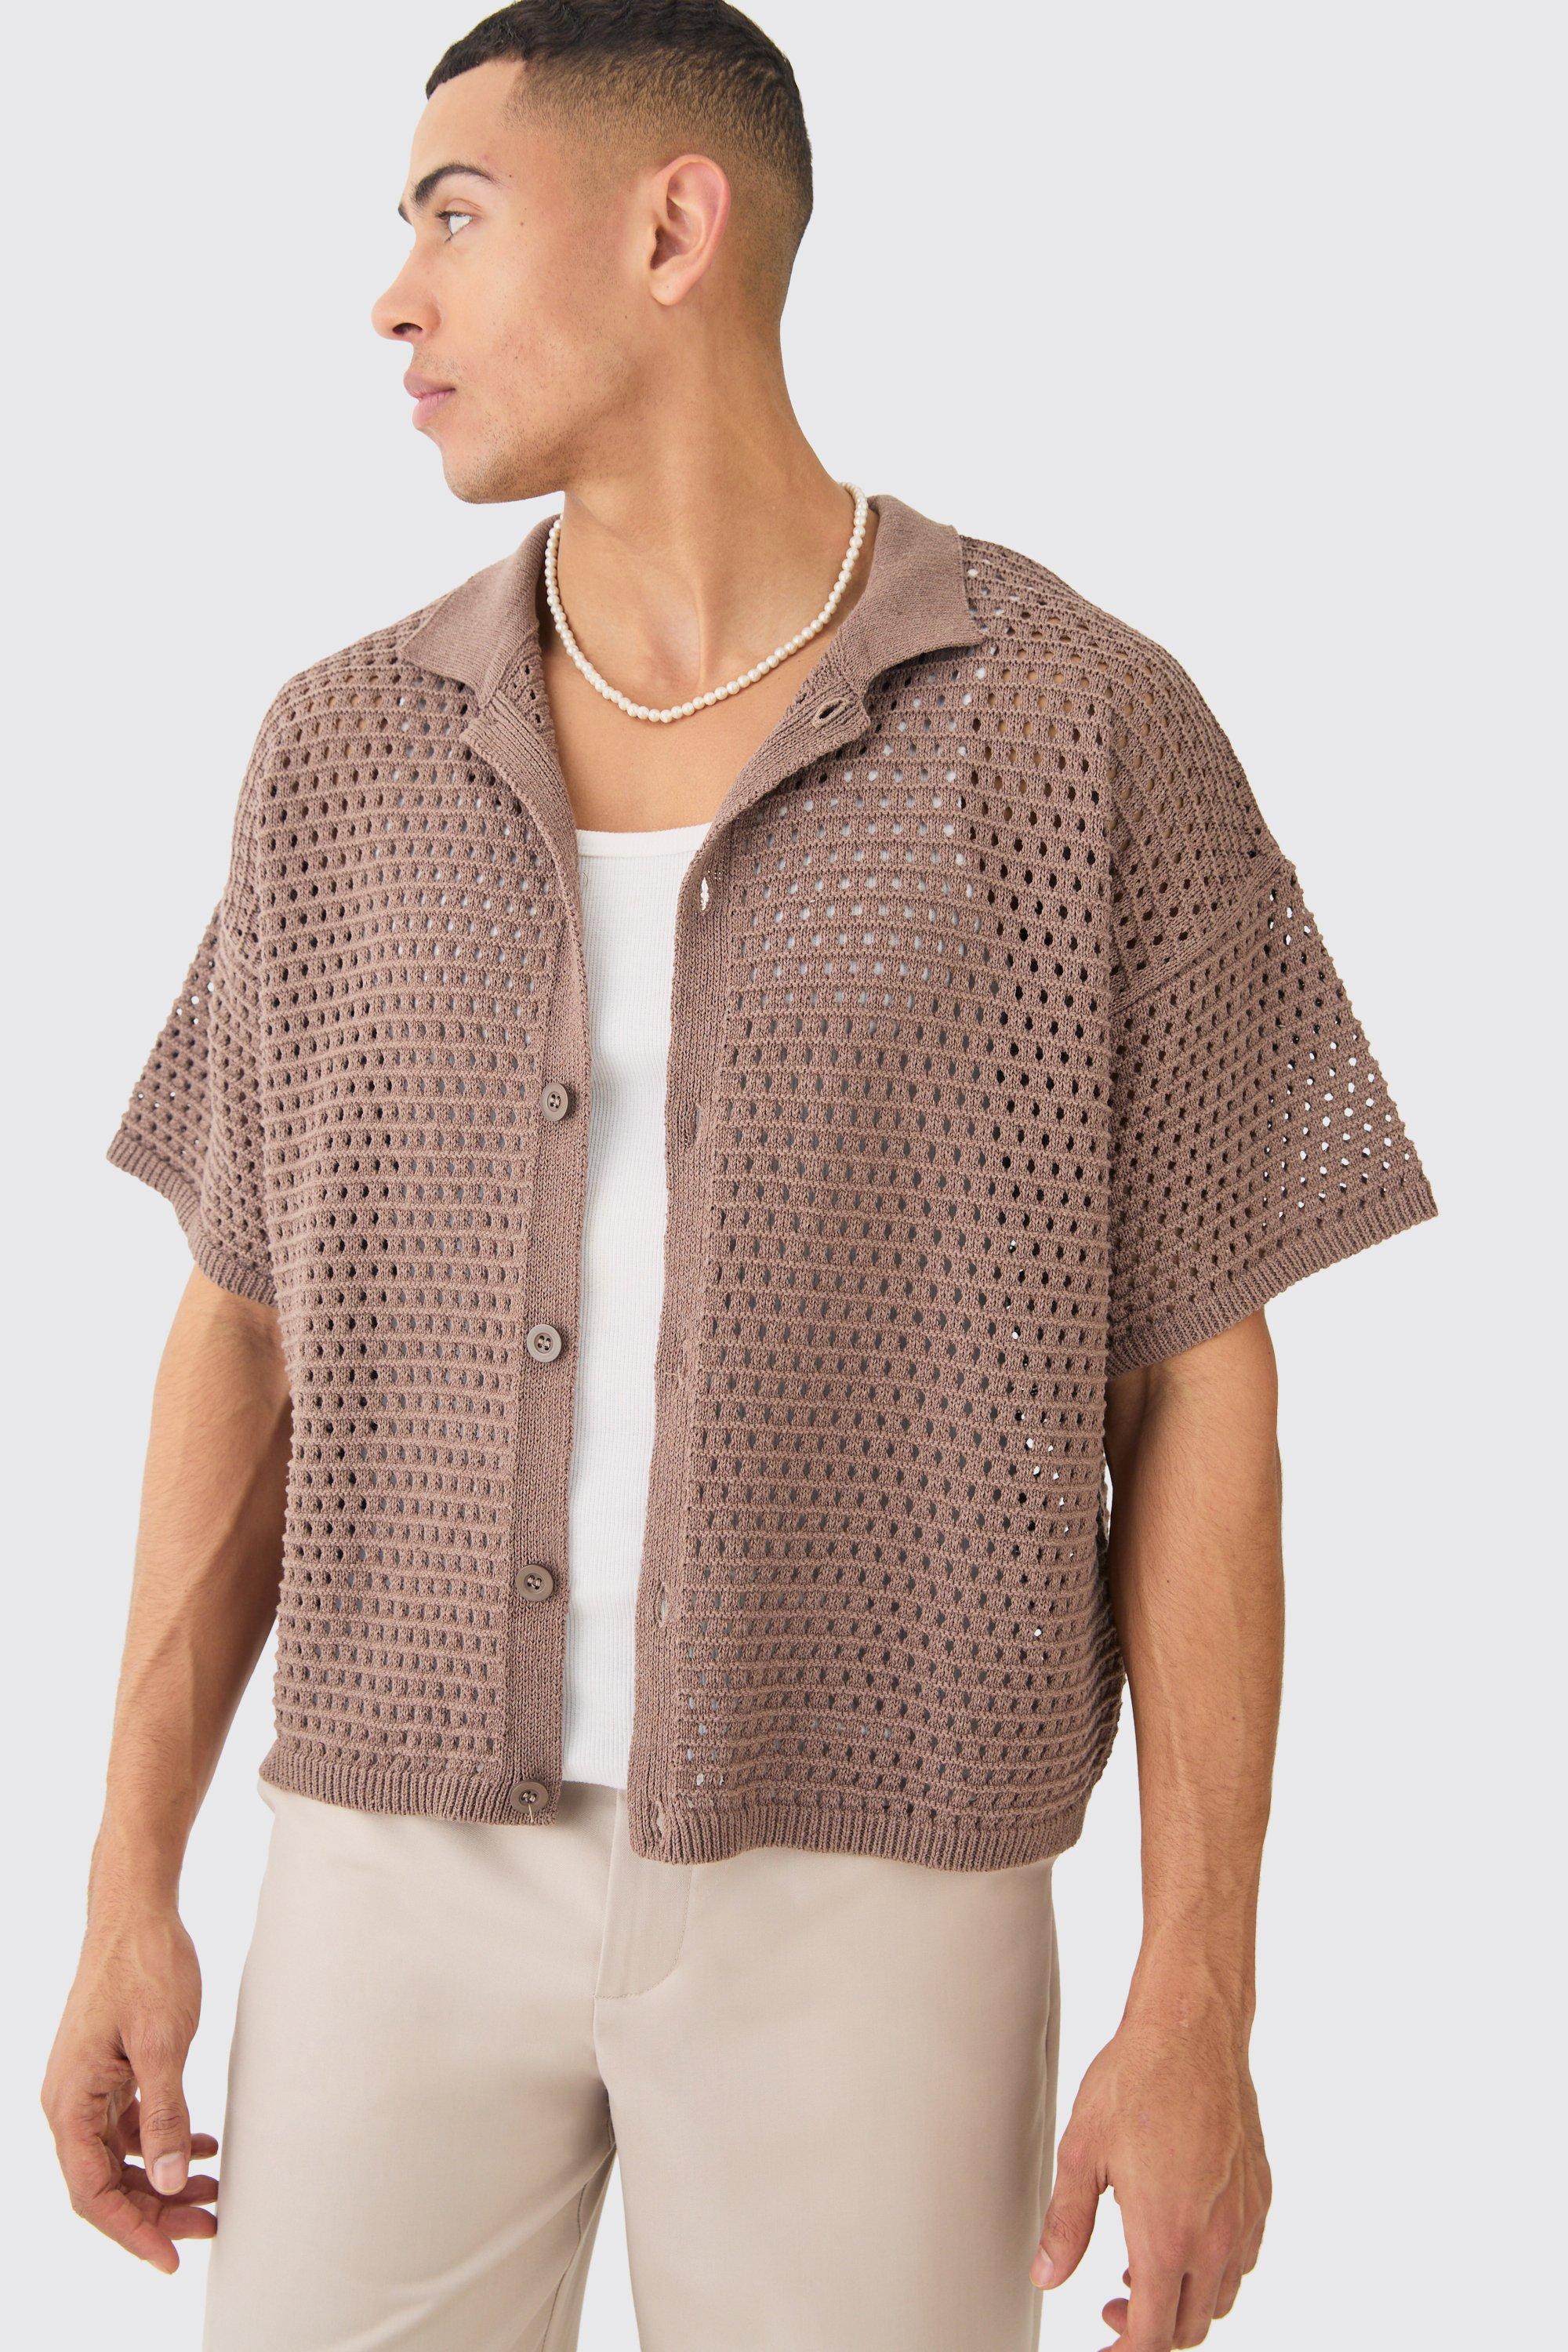 Image of Oversized Boxy Textured Open Stitch Knit Shirt In Chocolate, Brown